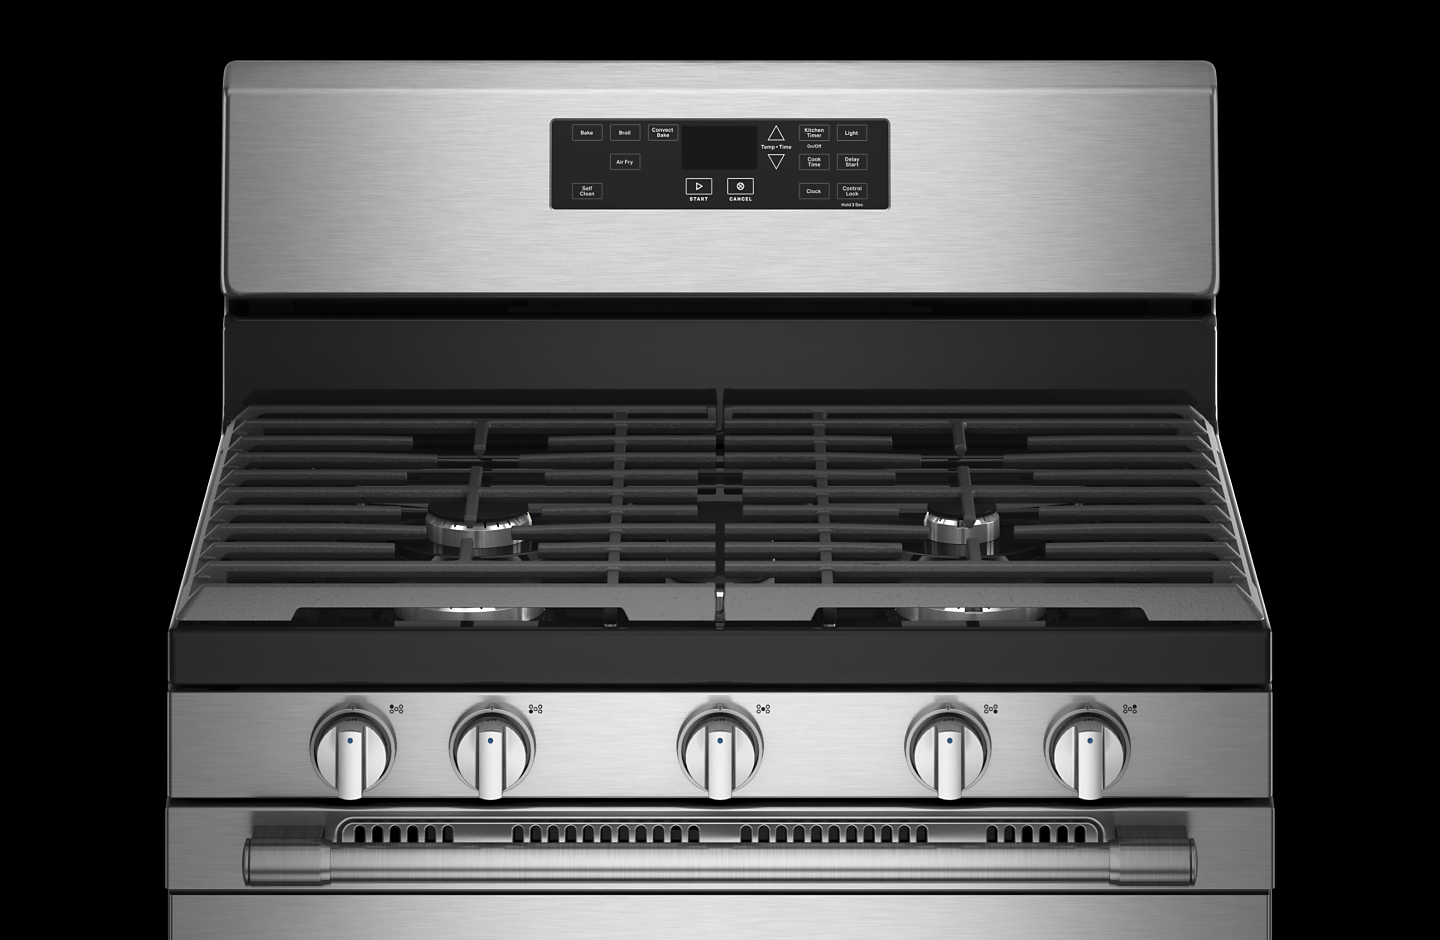 Electric Oven is Not Cooking Evenly? Troubleshooting tips & guide.